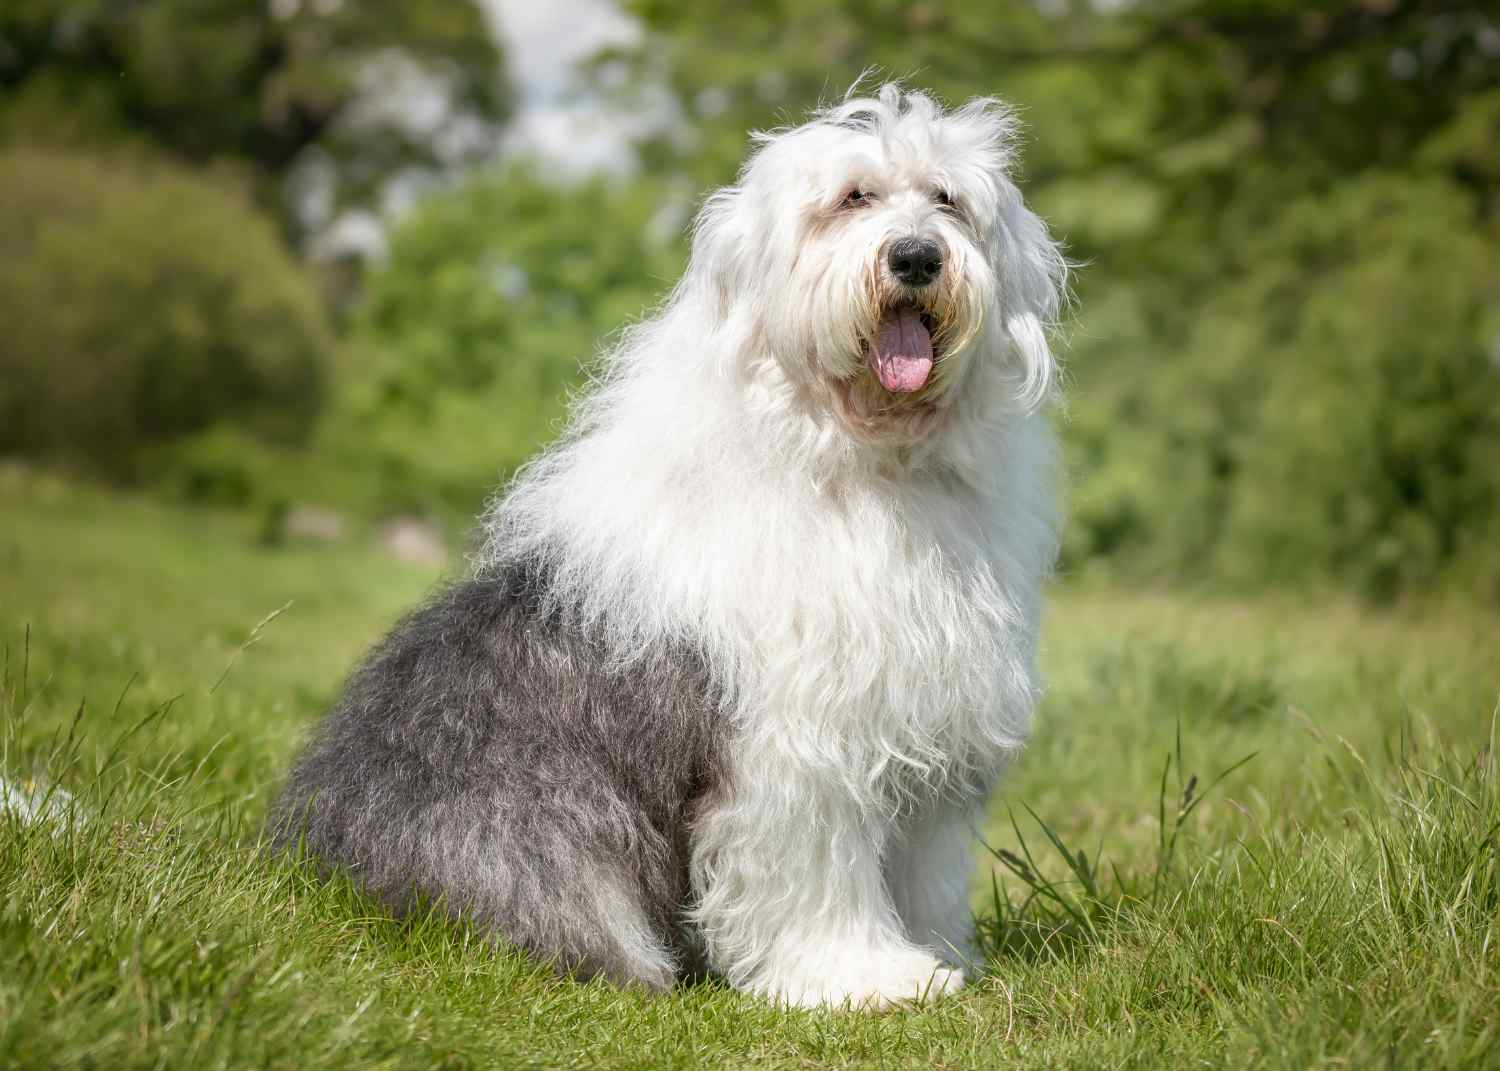 An Old English Sheepdog sitting in a field